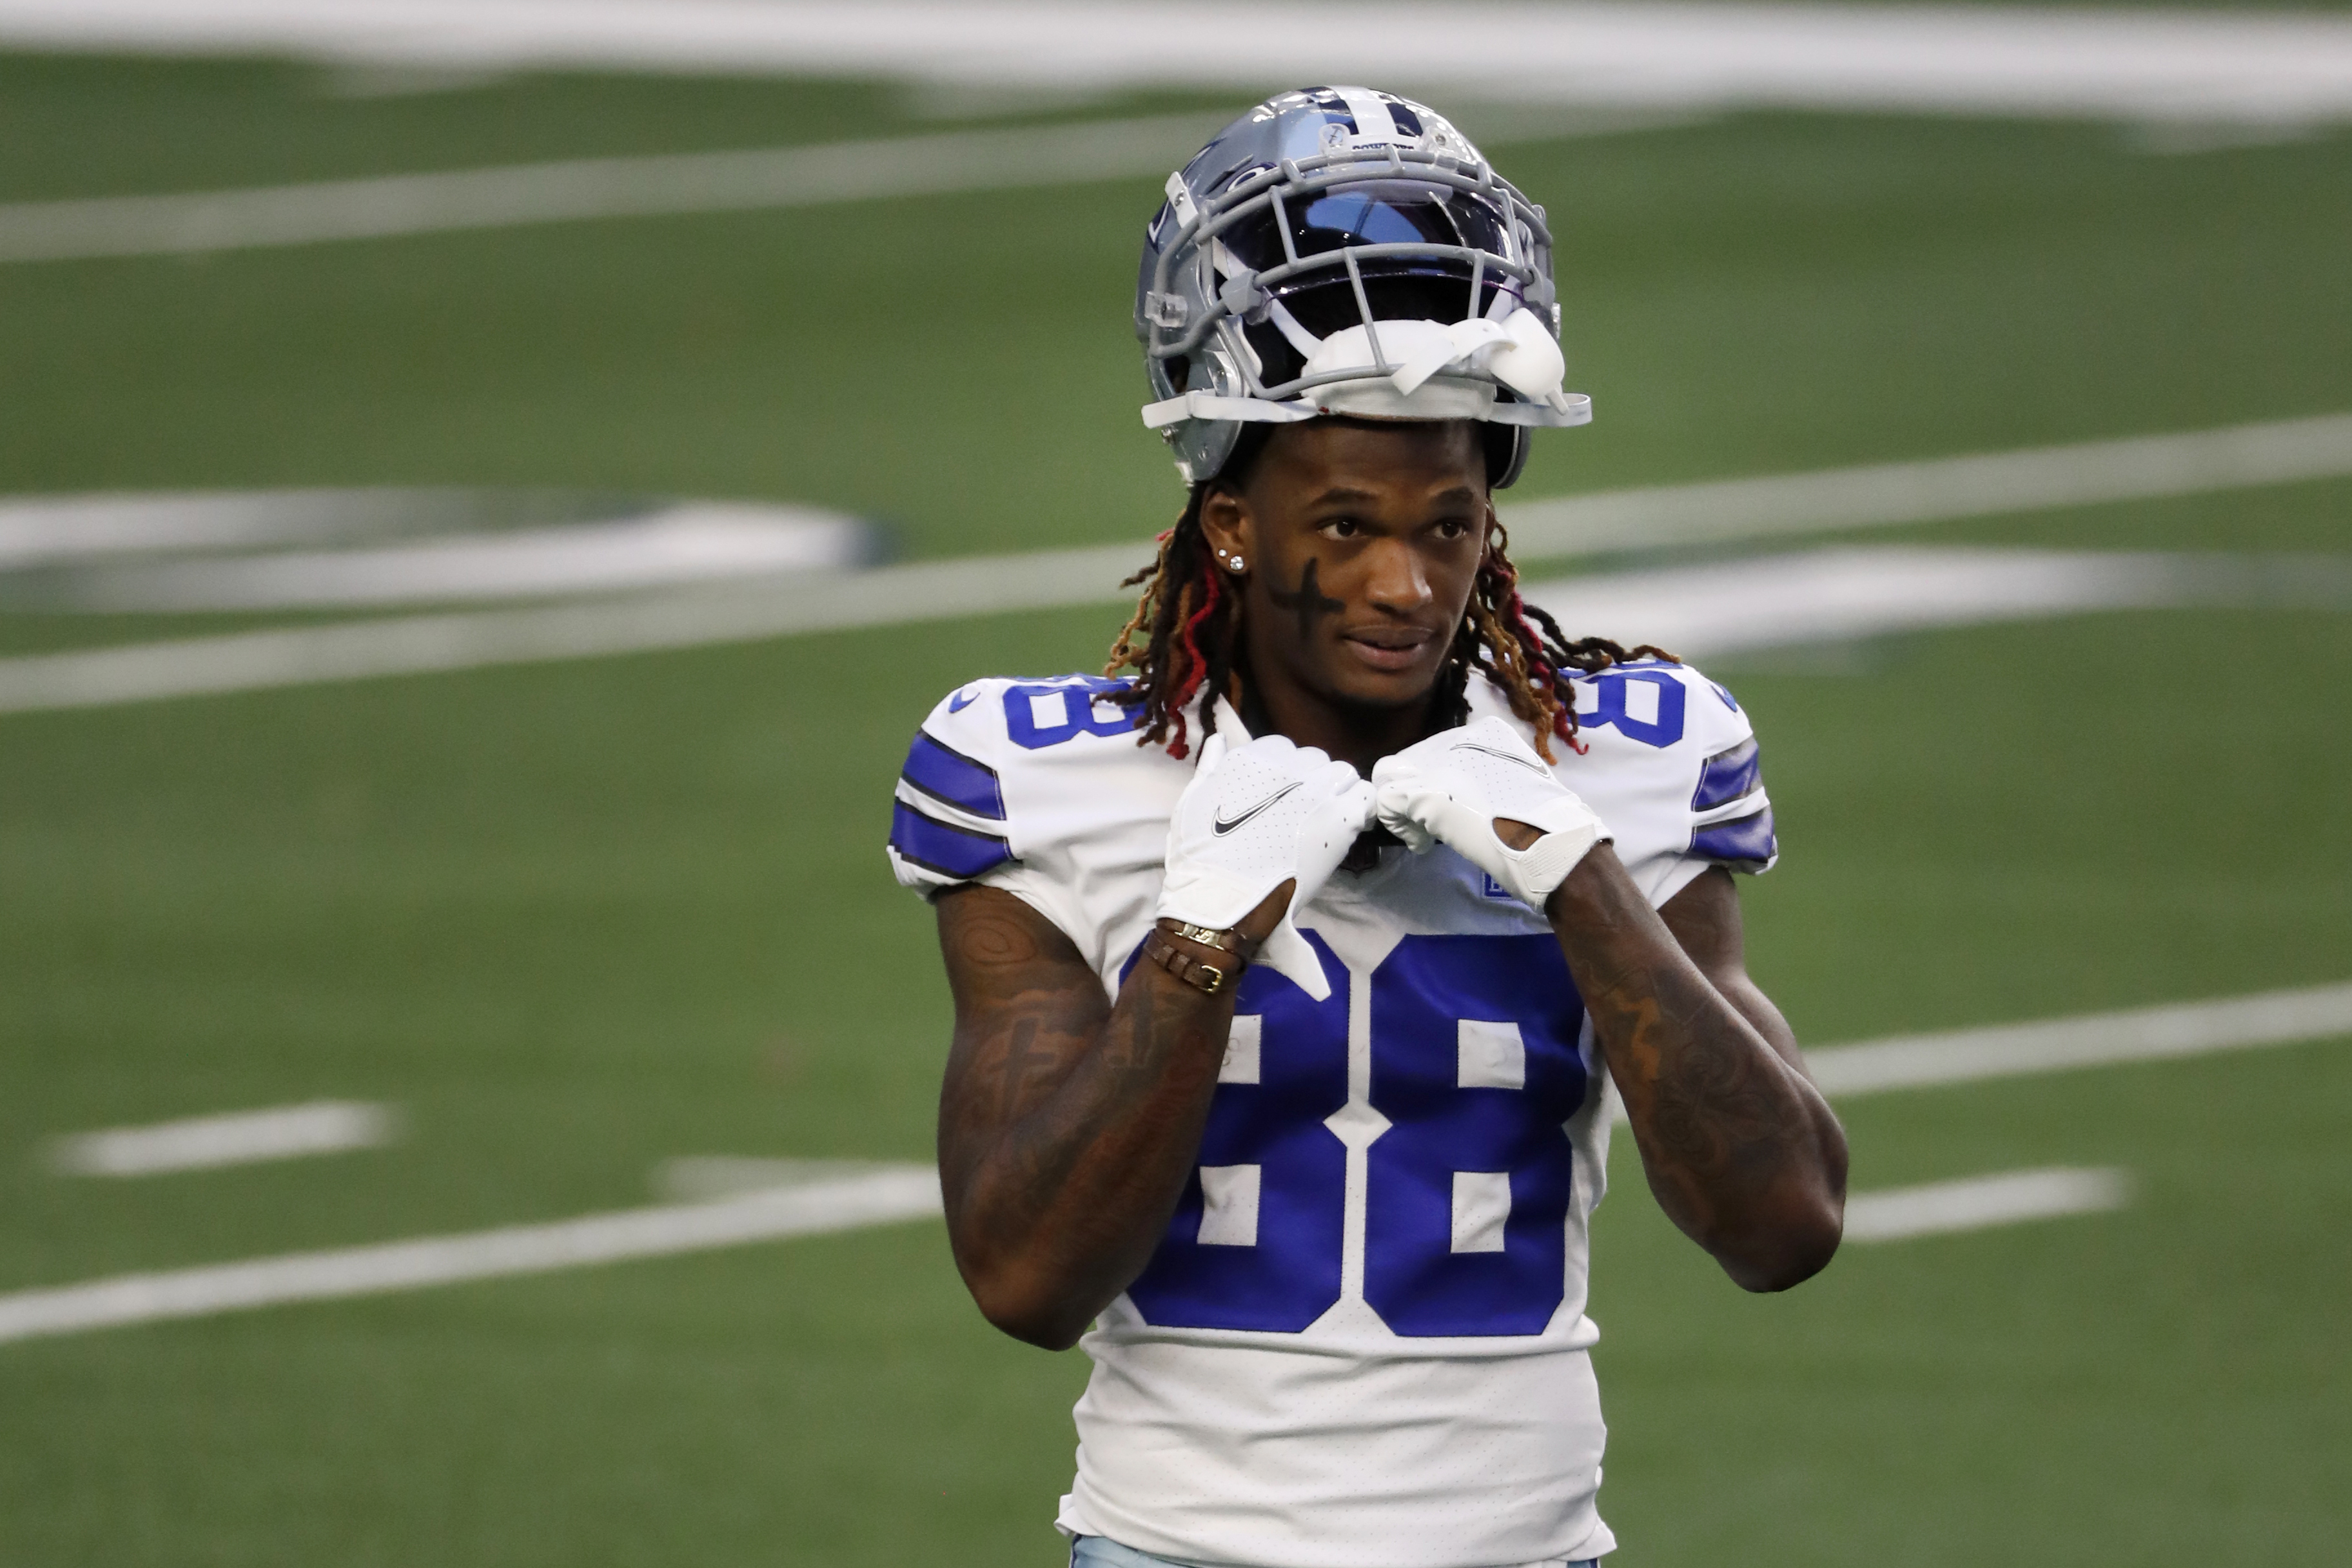 NFL: Cowboys place CeeDee Lamb, 4 others in COVID protocol